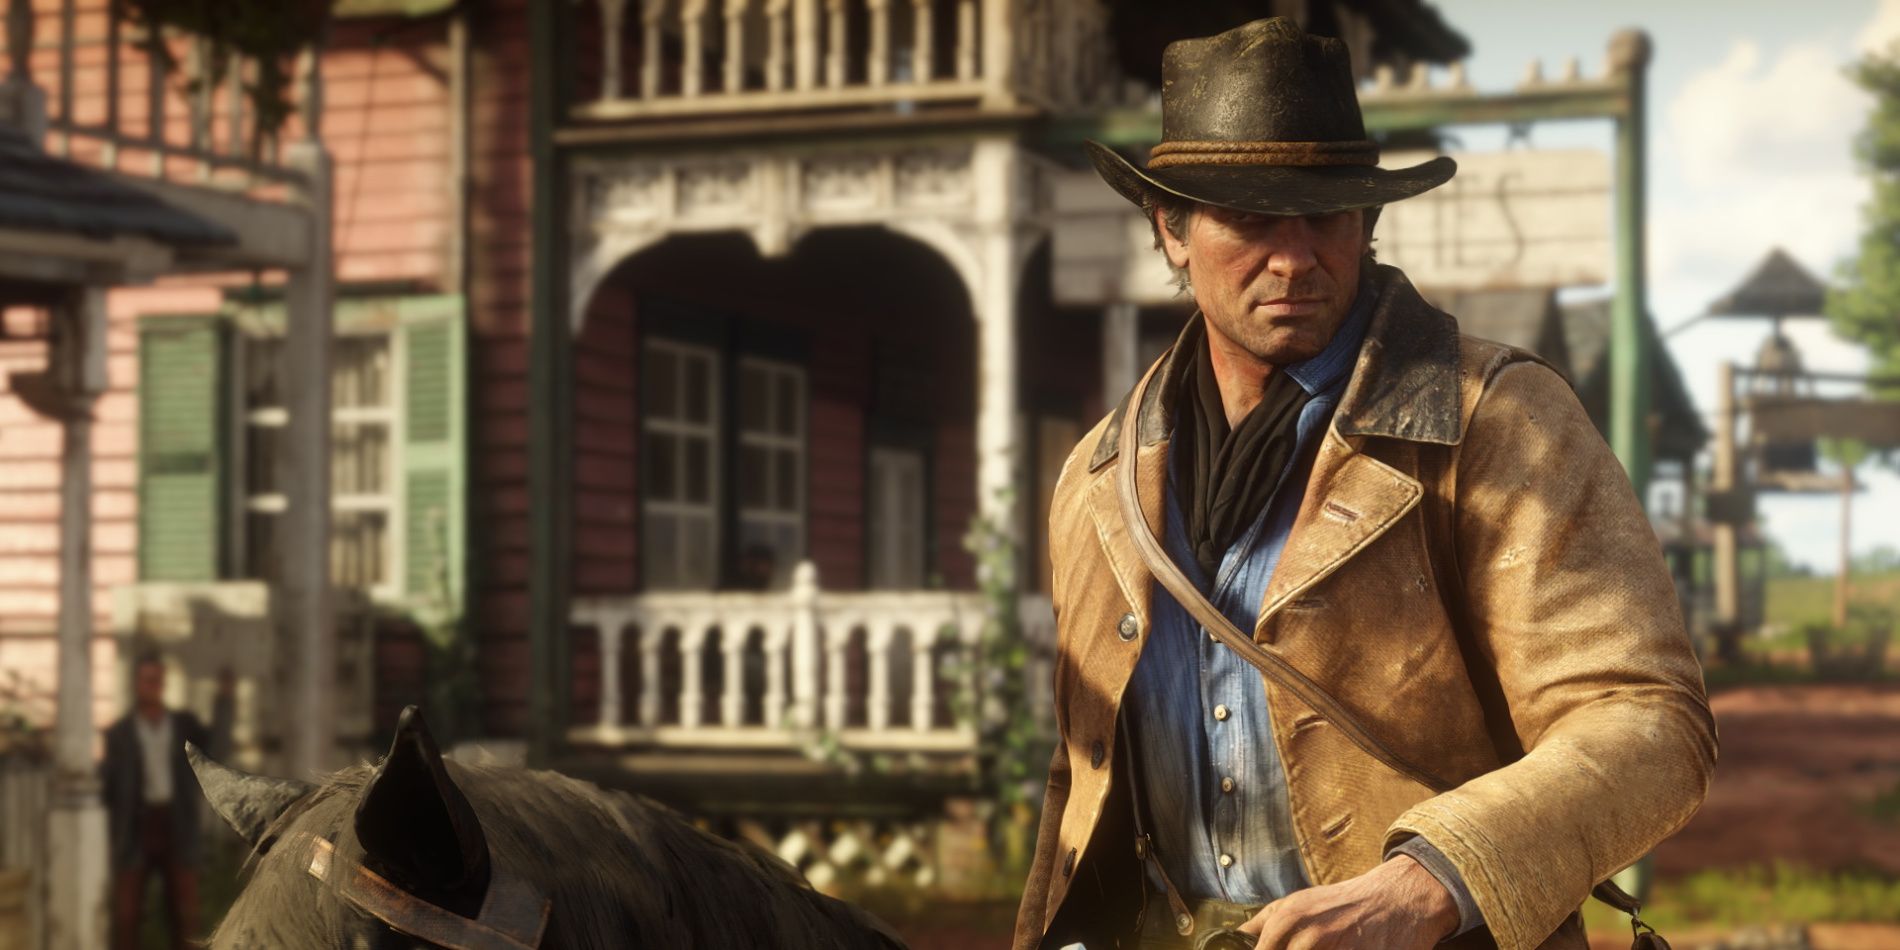 Why Red Dead Redemption 2 enhanced version for PS5 and Xbox Series X